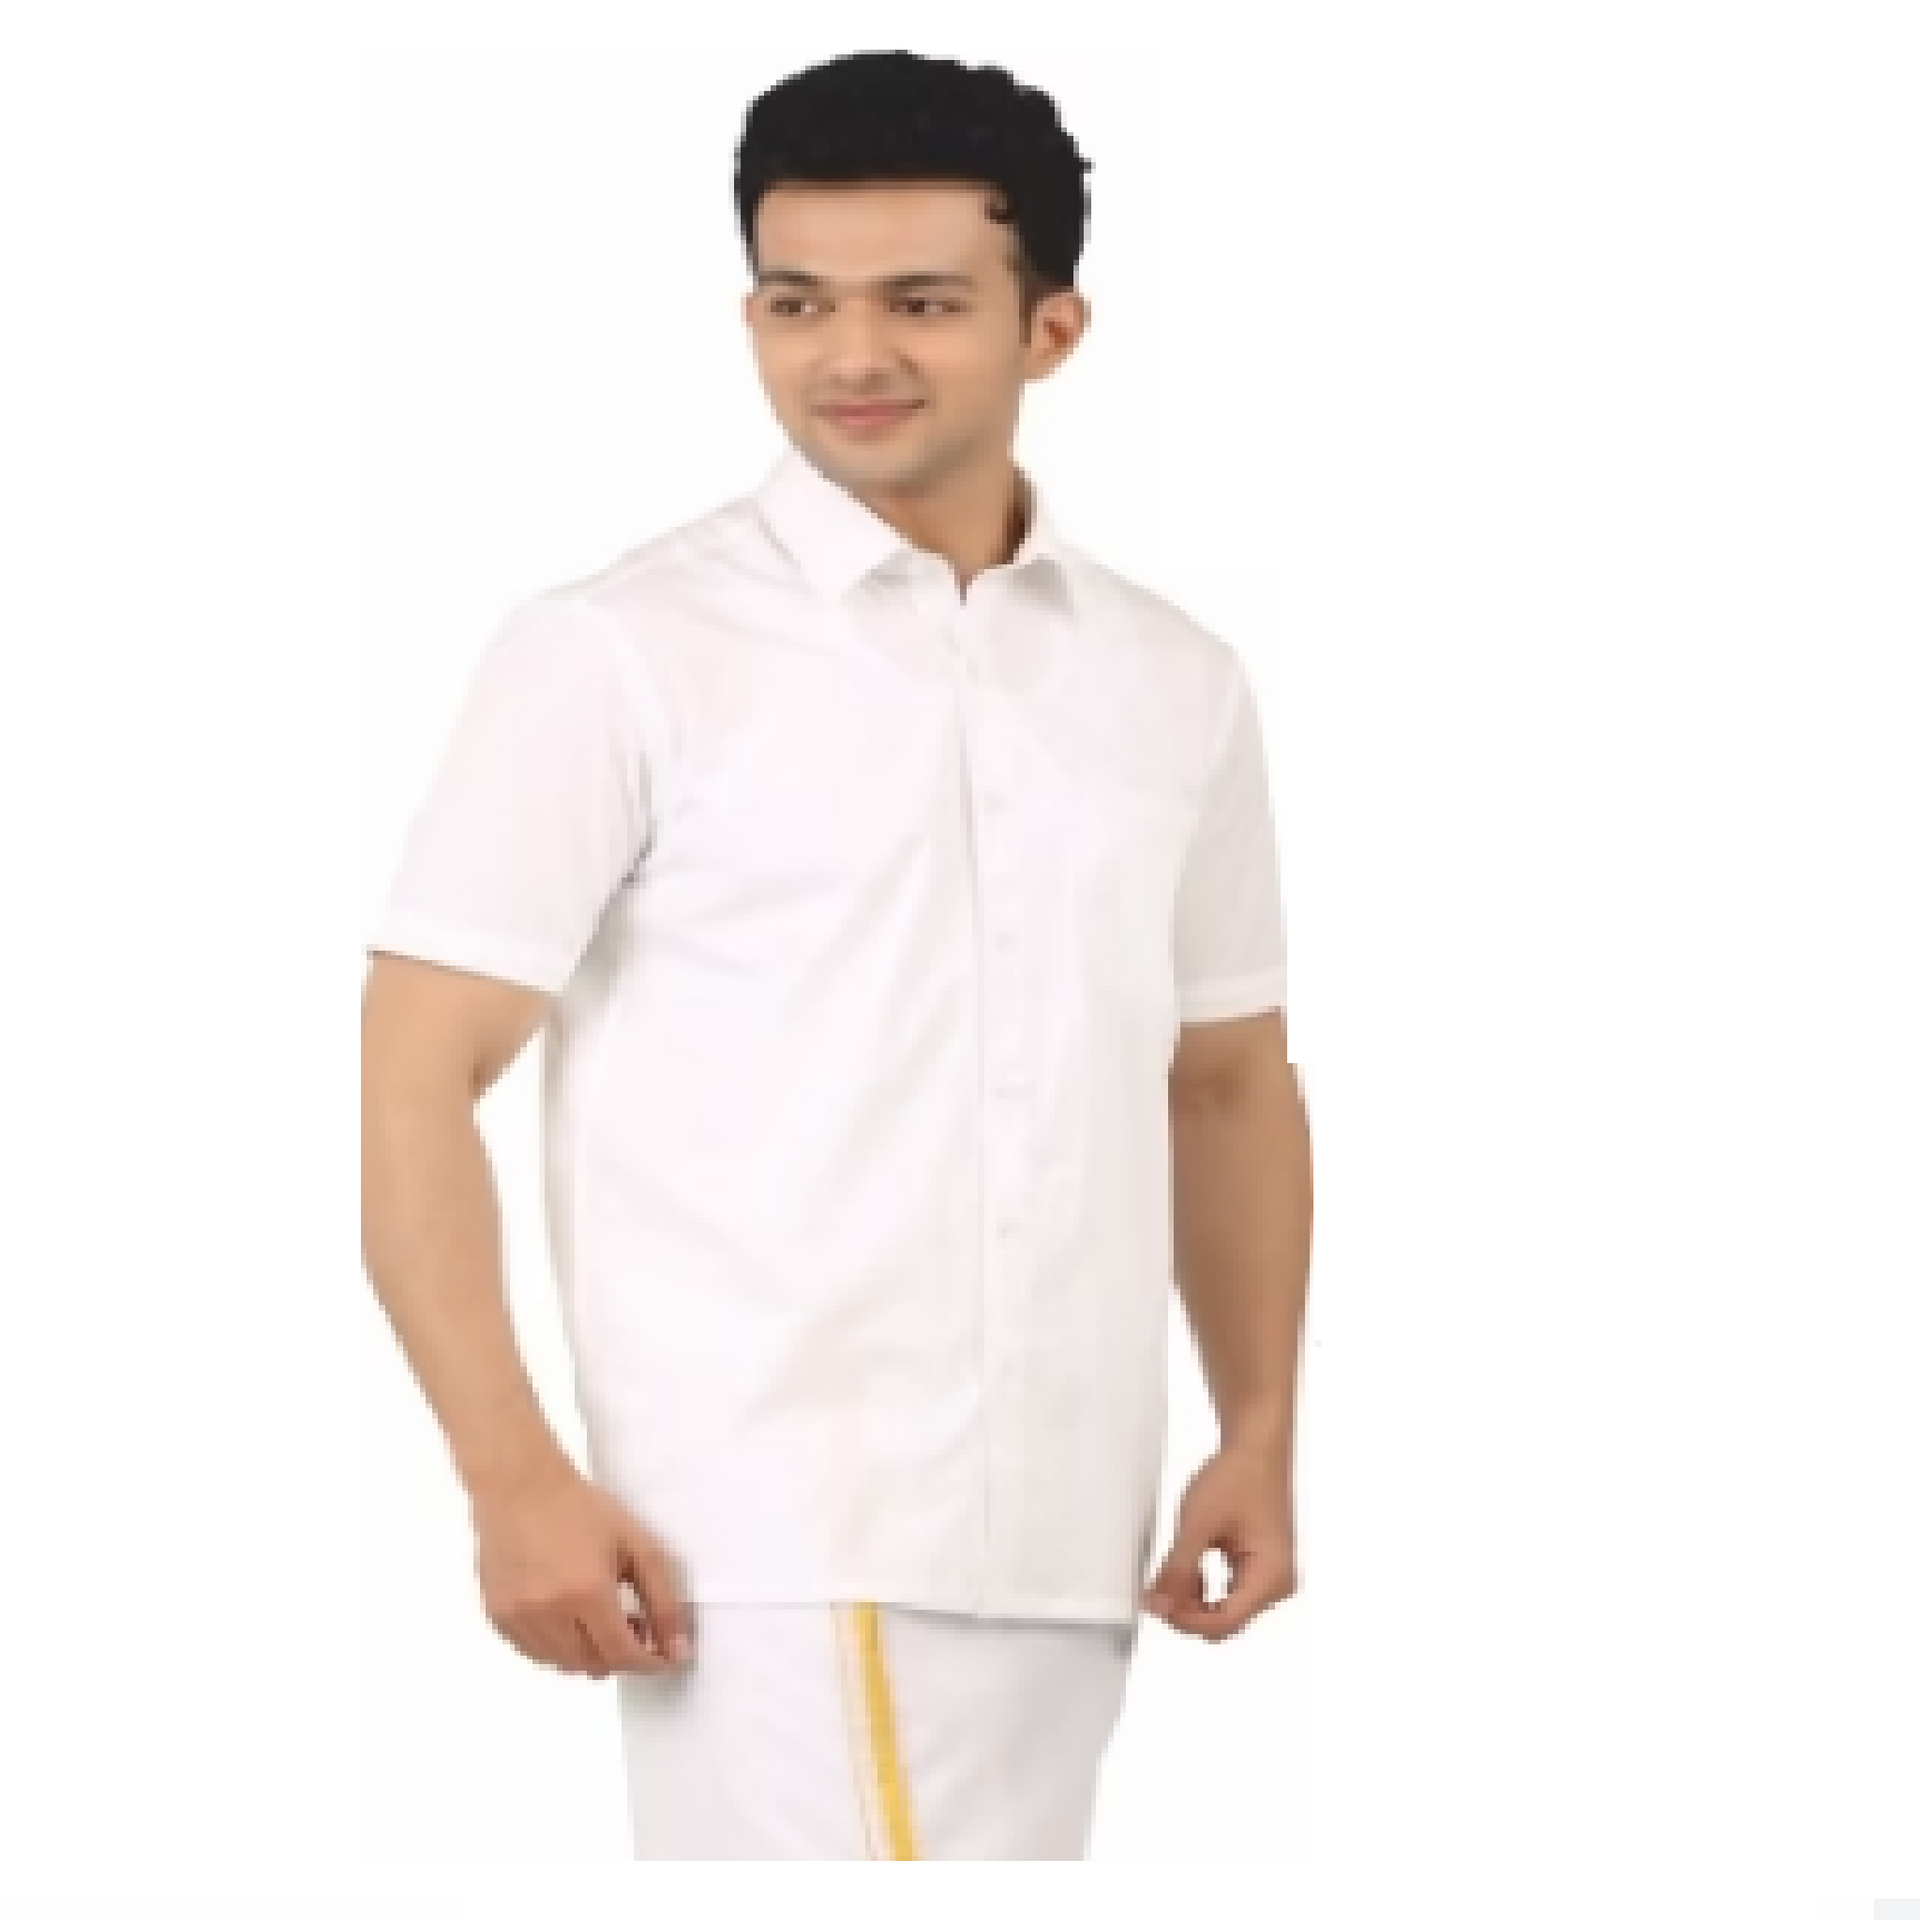 POOMEX White Shirt Full Sleeve (38) : : Clothing & Accessories